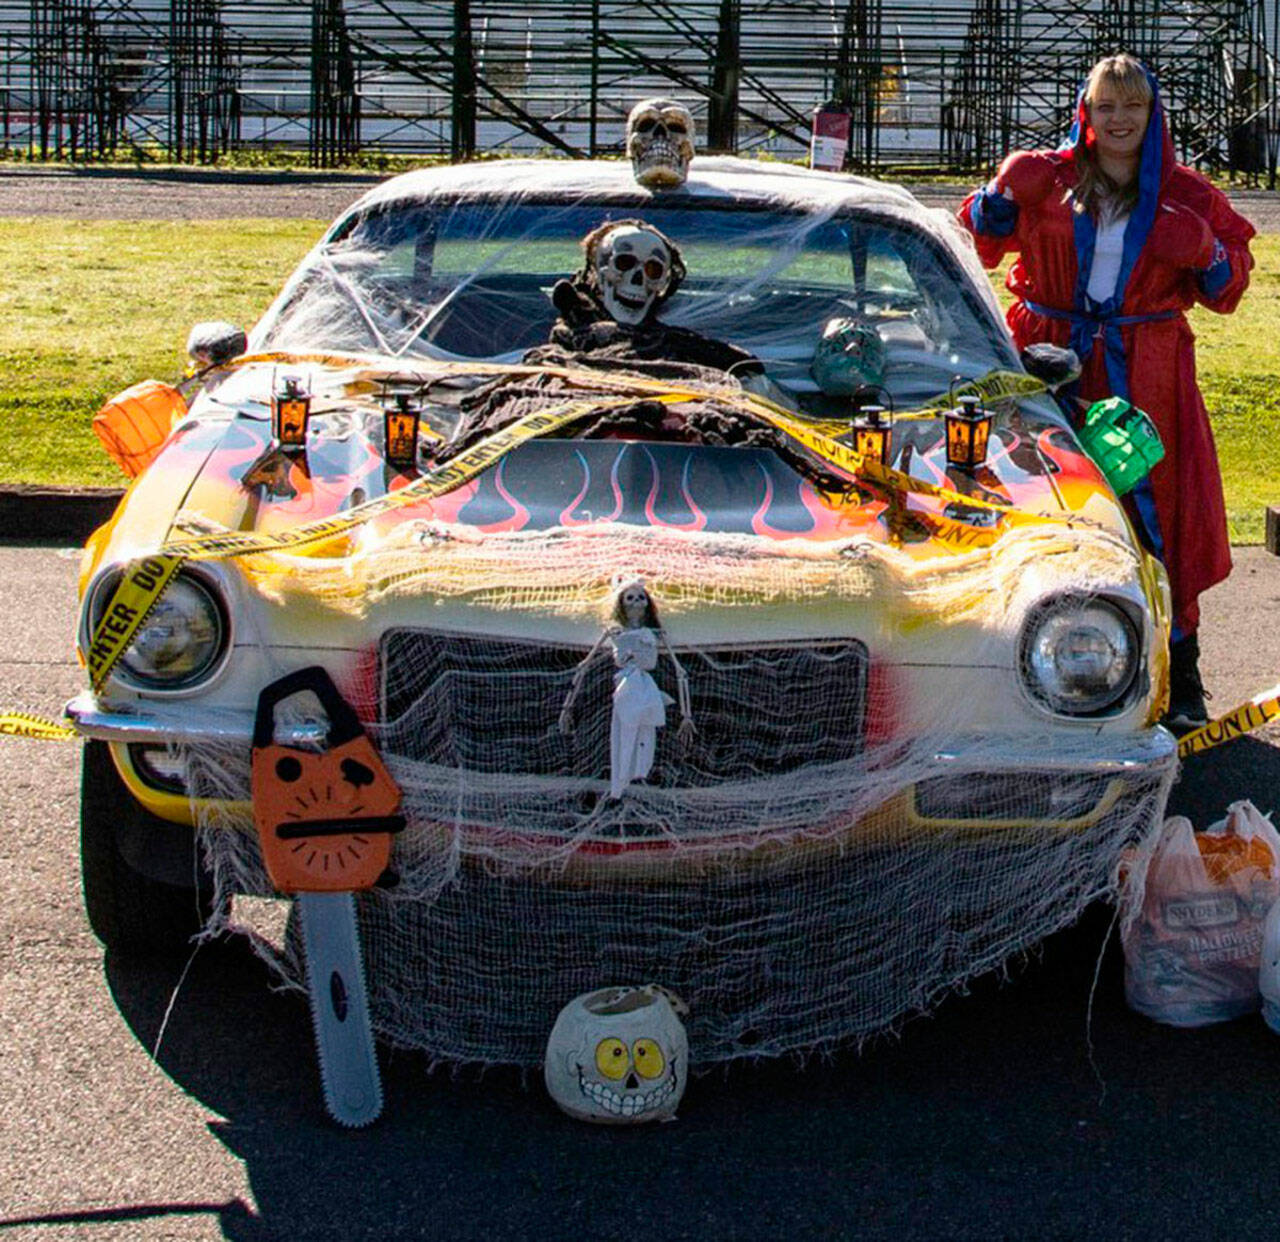 The Pacific Raceways free drive-thru Trunk or Treat event is from 11 a.m. to 3 p.m. on Sunday, Oct. 31. COURTESY FILE PHOTO, Pacific Raceways